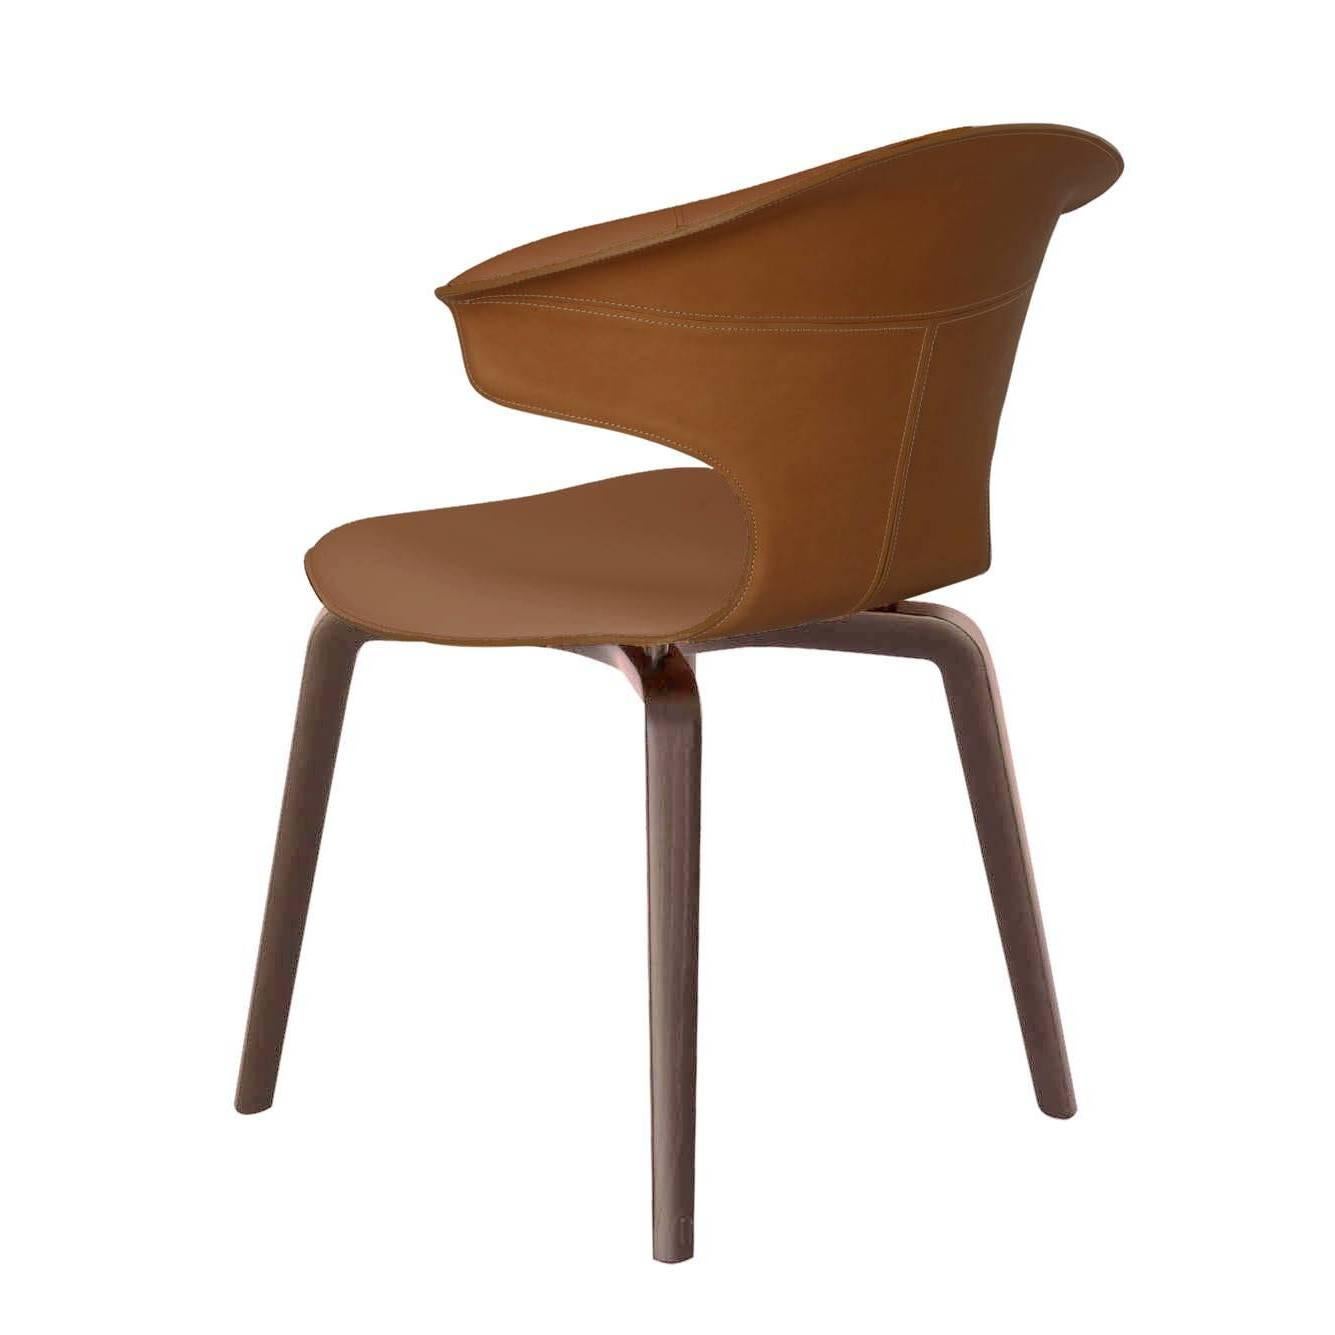 The Montera chair with arms designed by Roberto Lazzeroni has a formal lightness that expresses the sensory charm of its materials: the raw cut processing exalts the tactility of the saddle-leather and leather which, combined together, complement